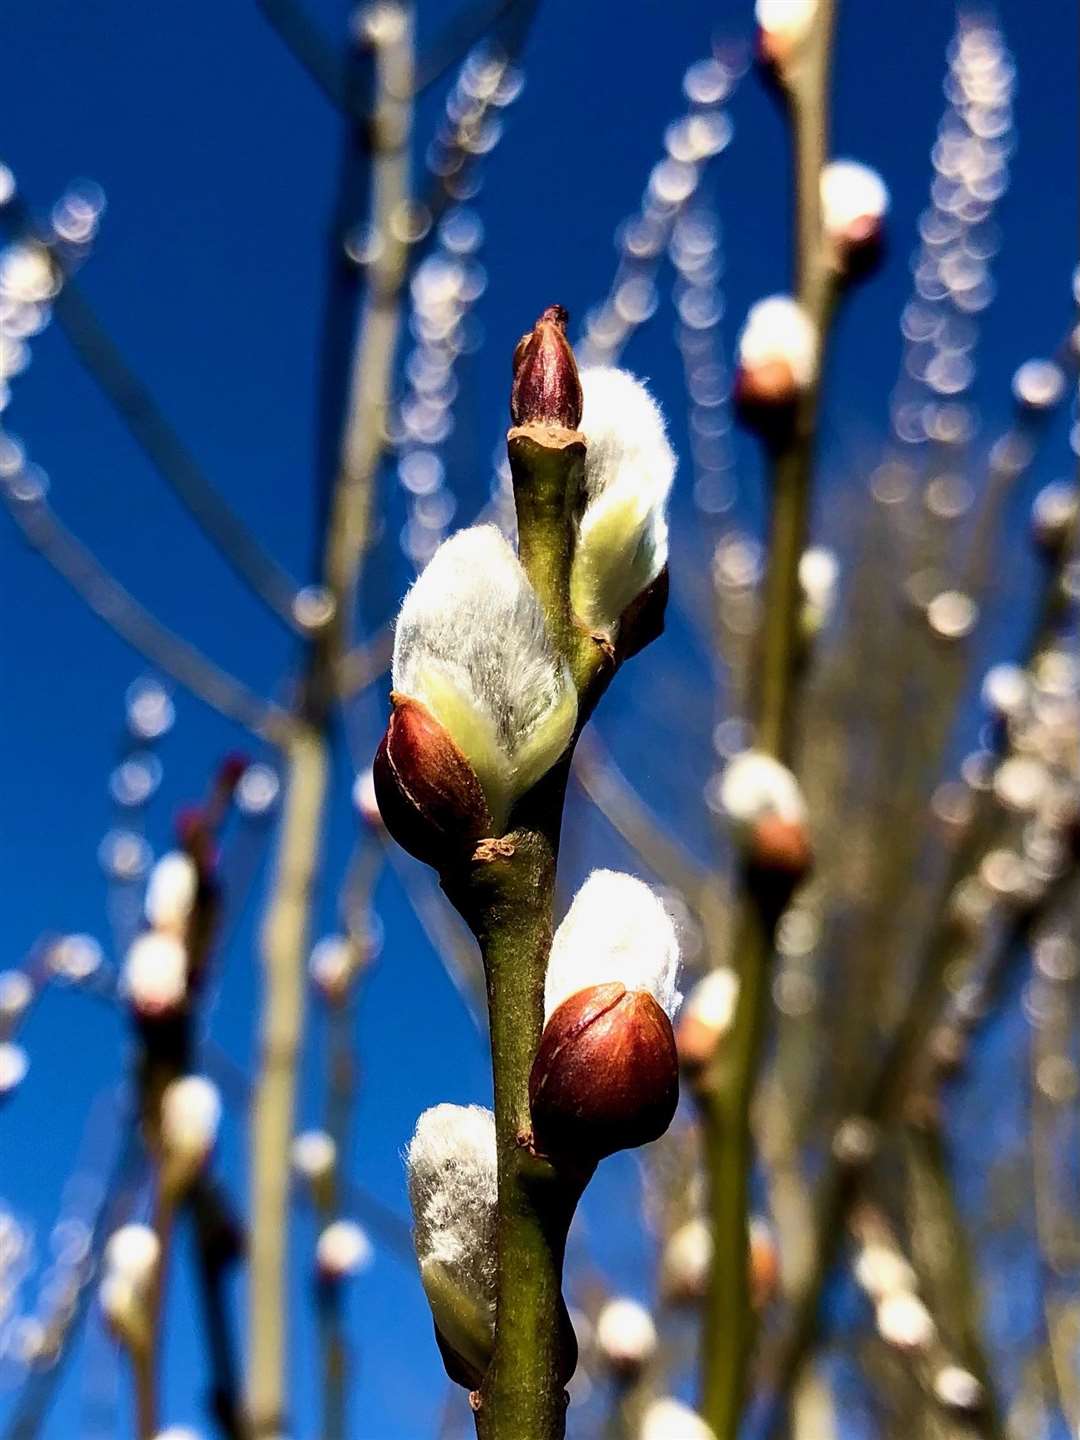 Pussy willow buds opening up at Bentfield Green pond in Stansted. Picture: Katrina Hardy (44765544)